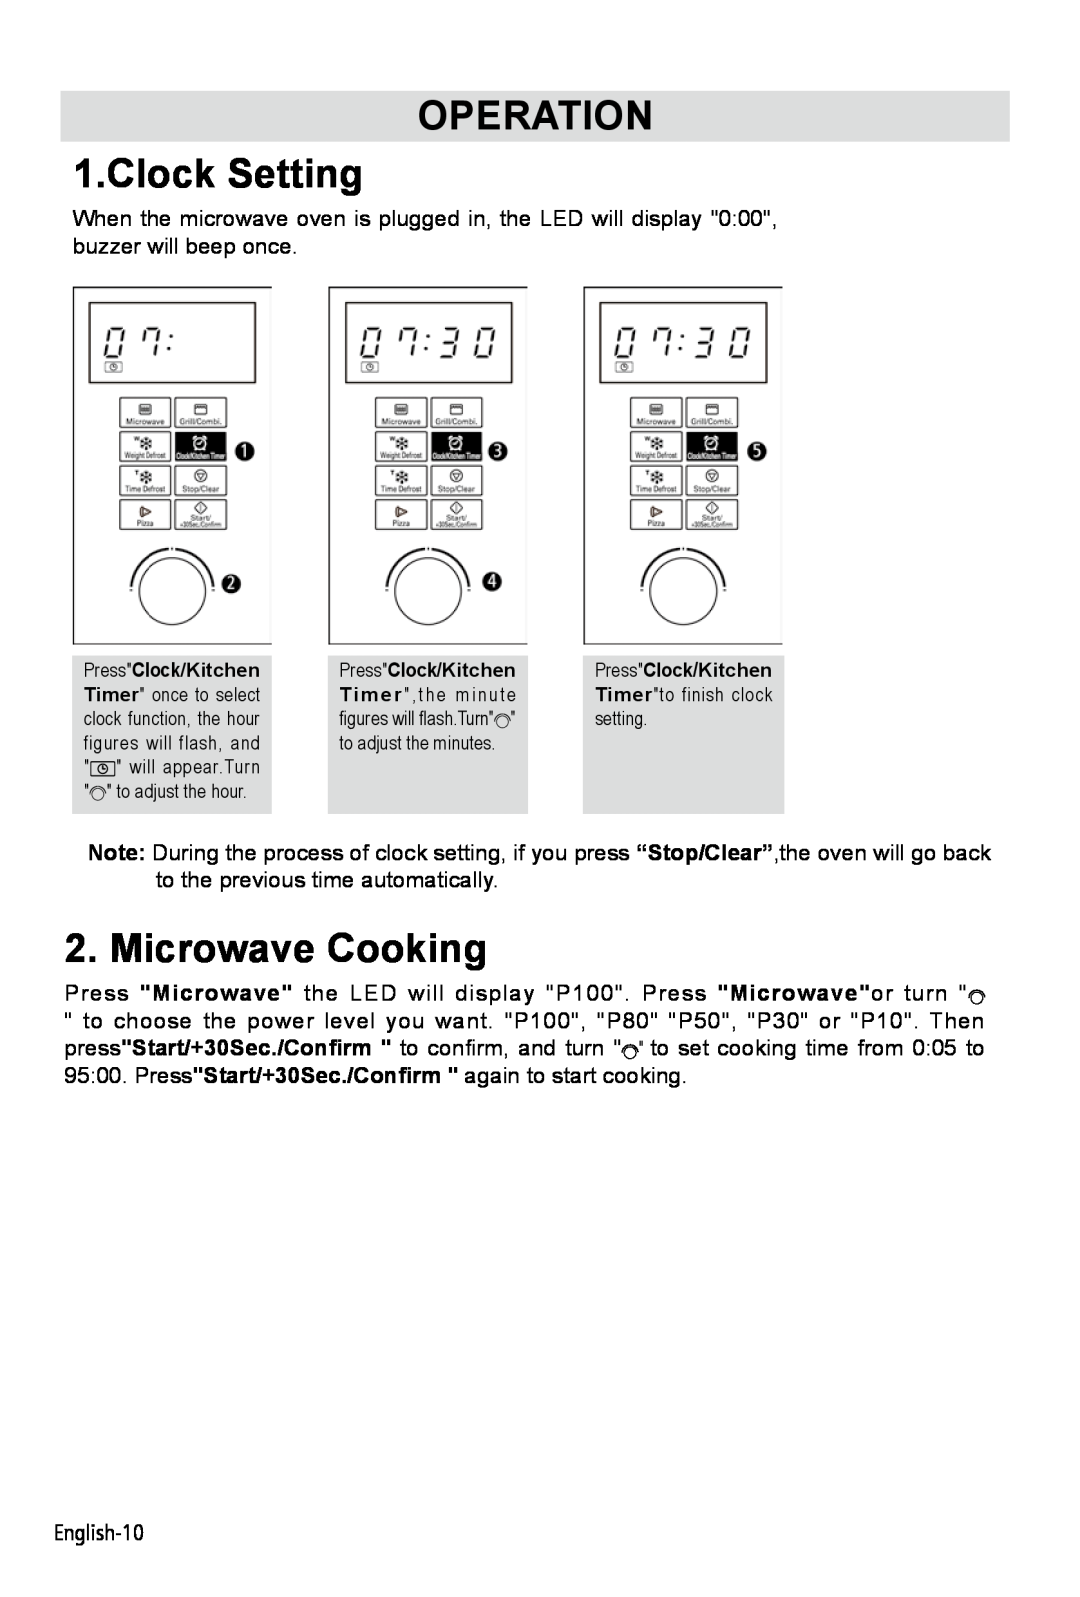 West Bend AG028PLV manual OPERATION 1.Clock Setting, Microwave Cooking 